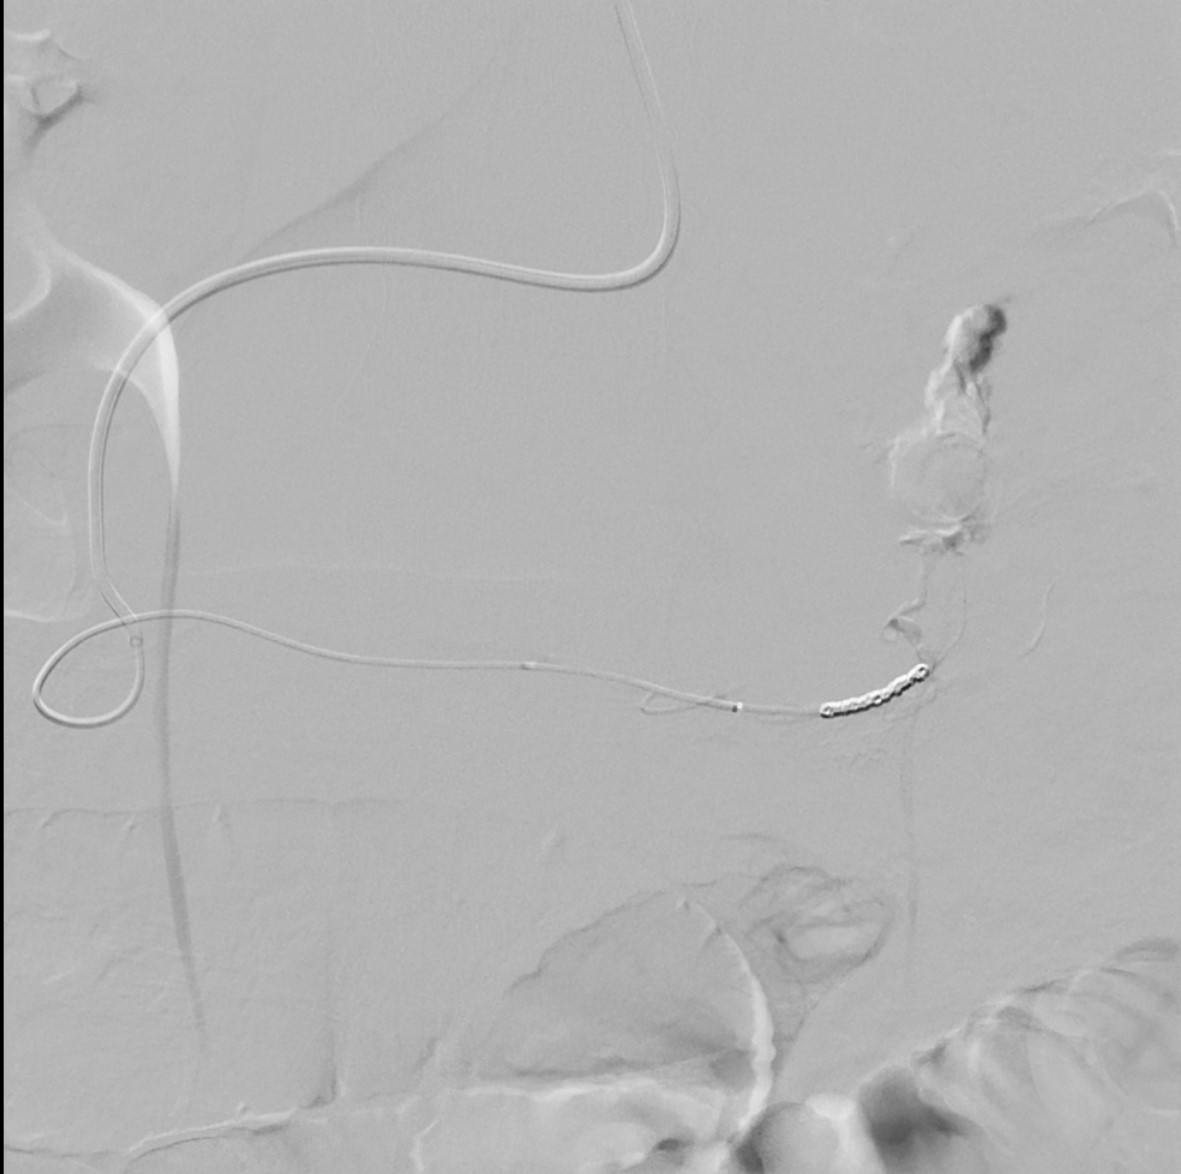 Coil and Gelfoam embolization for active extravasation from a branch of the right gastroepiploic artery using left radial access 
#IRad #TwittIR #radialaccess